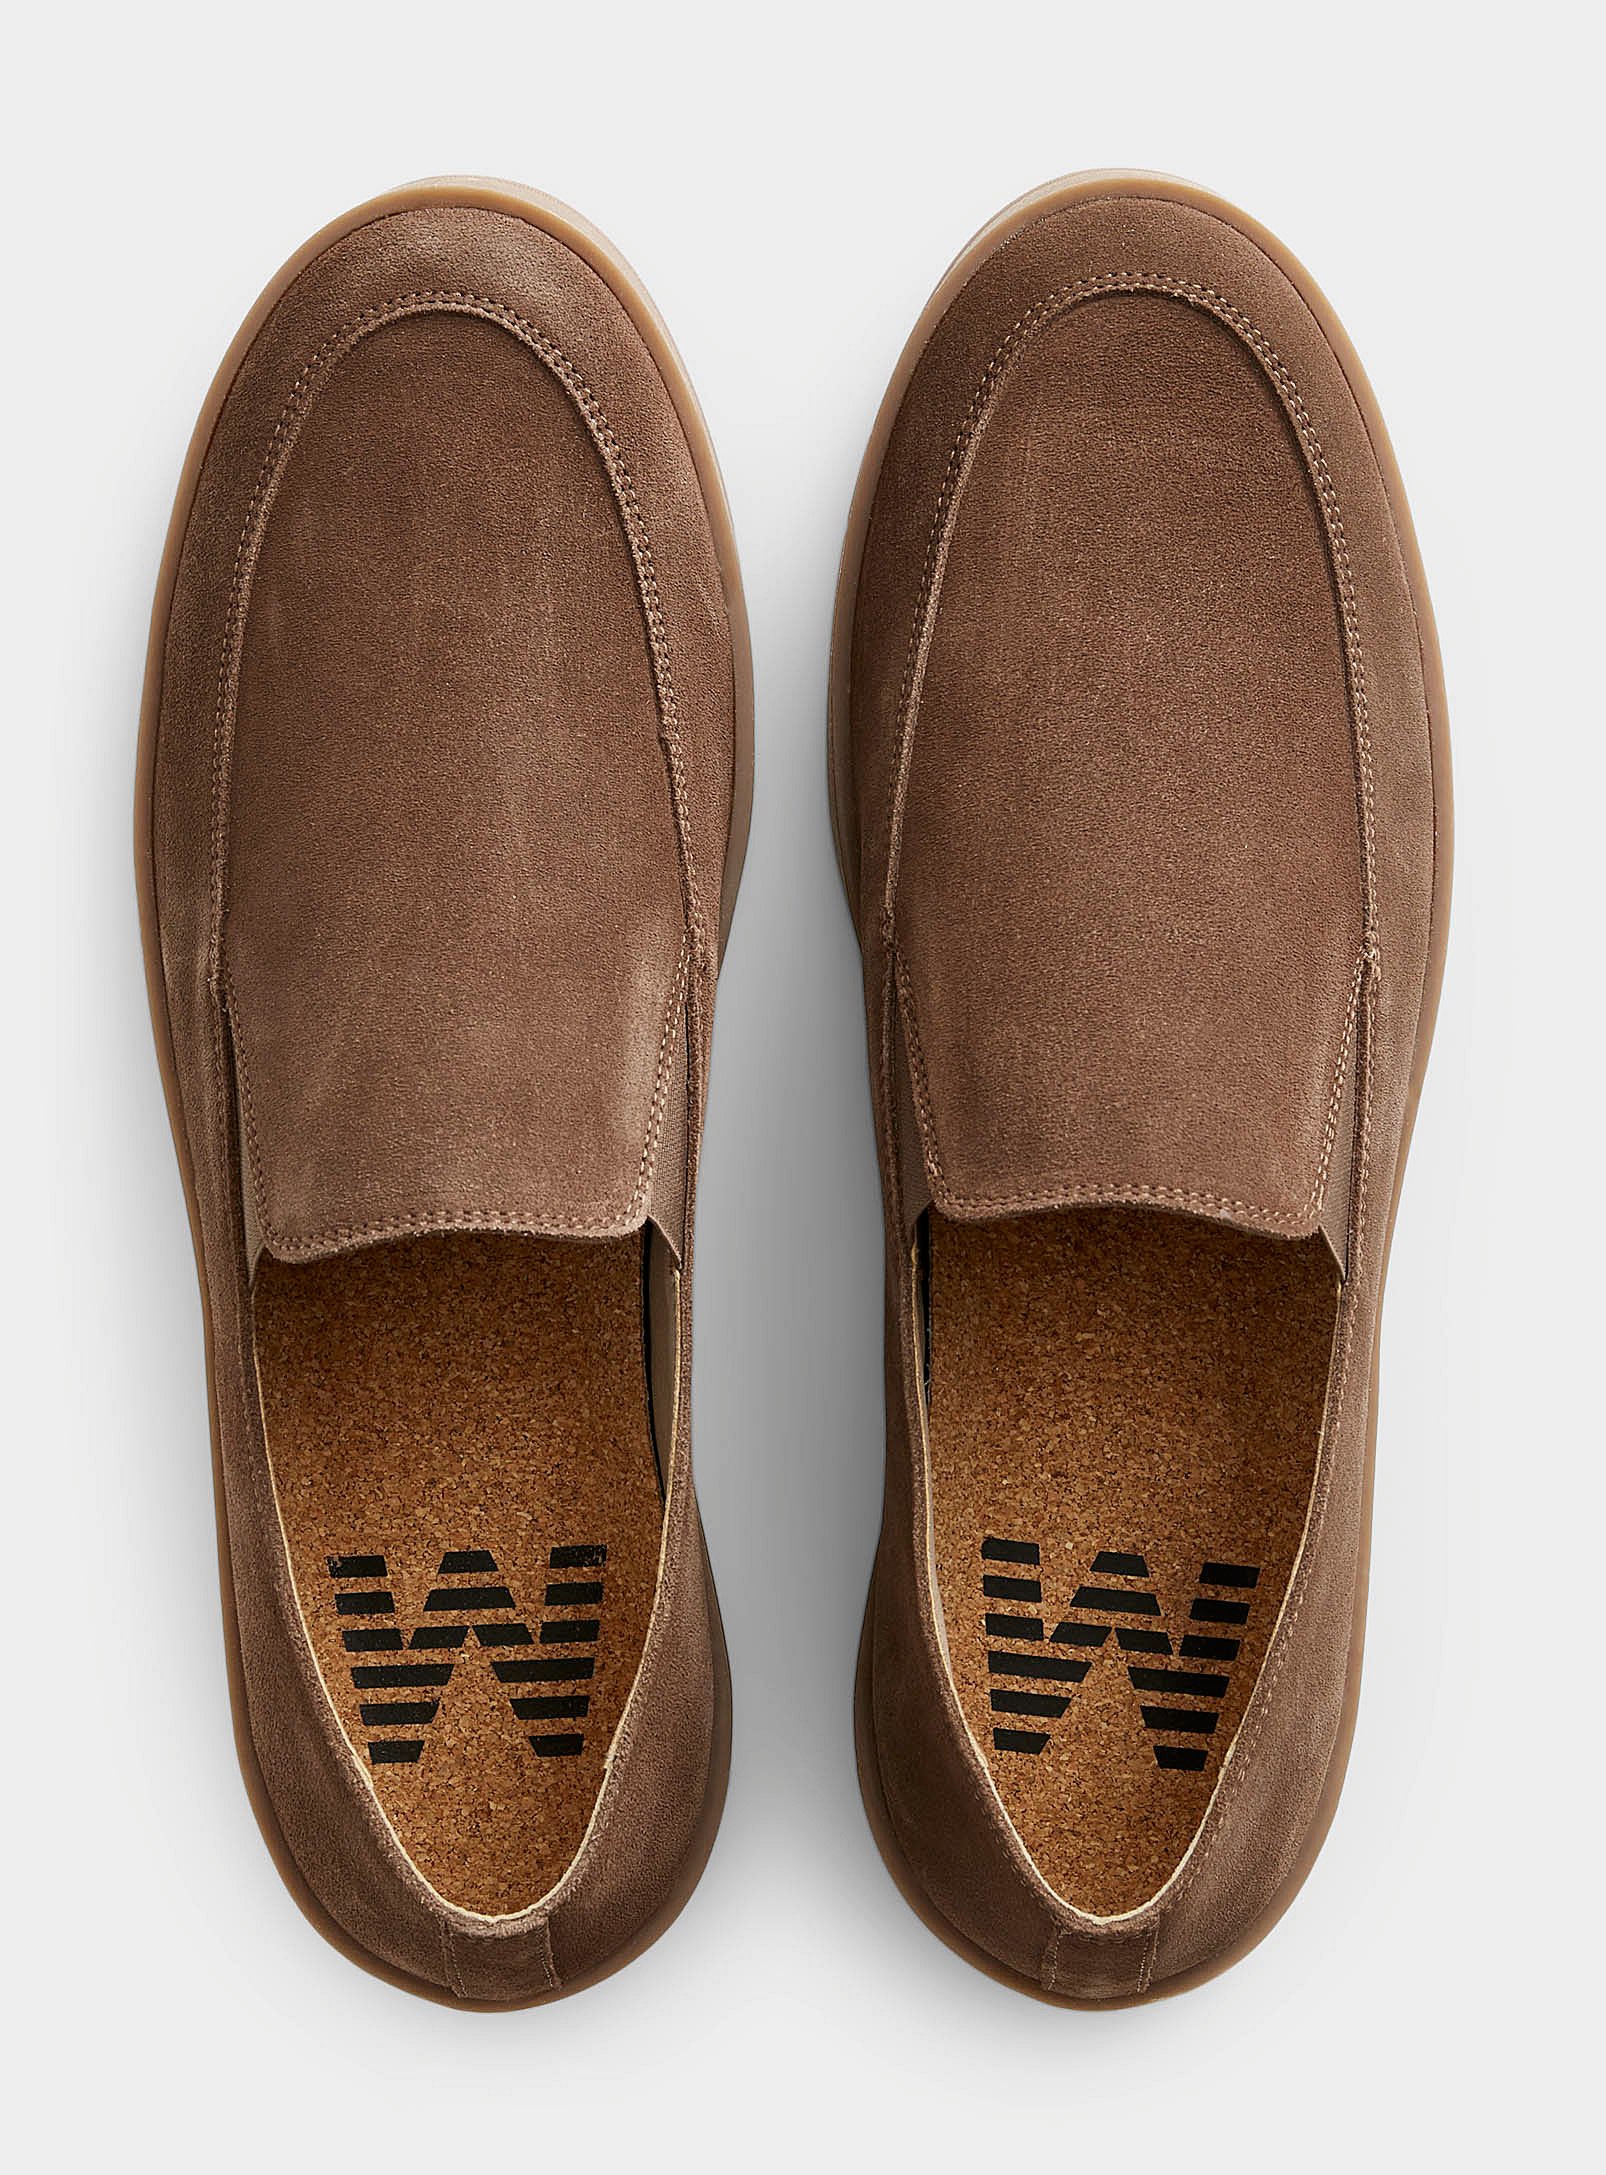 Matinique - Chaussures Le Slip-On Melchior Homme